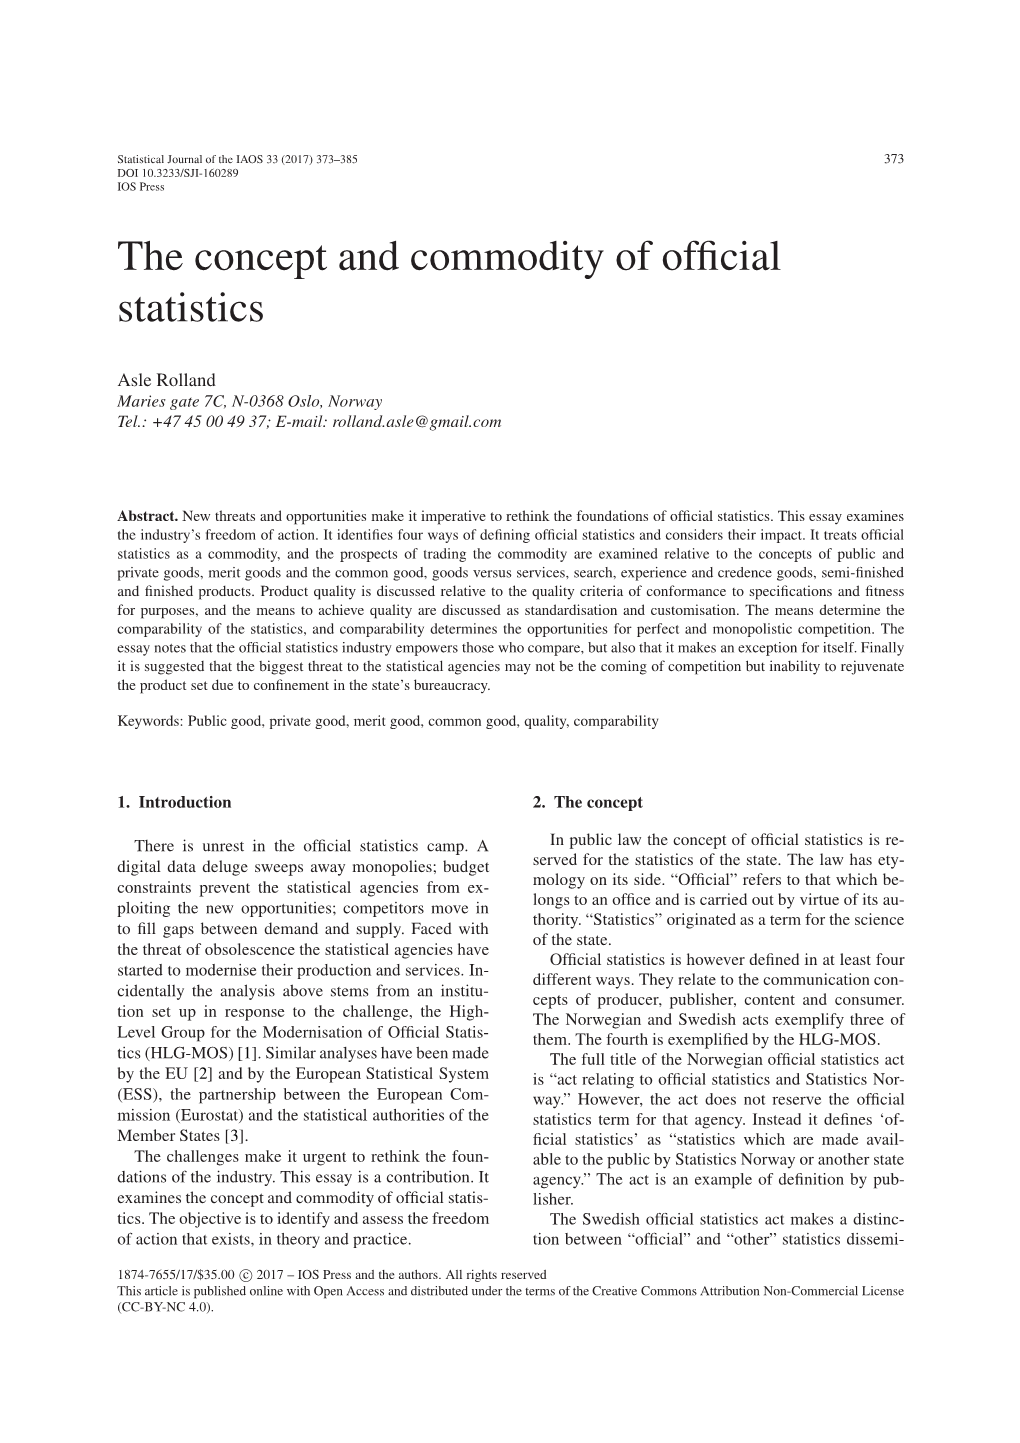 The Concept and Commodity of Official Statistics